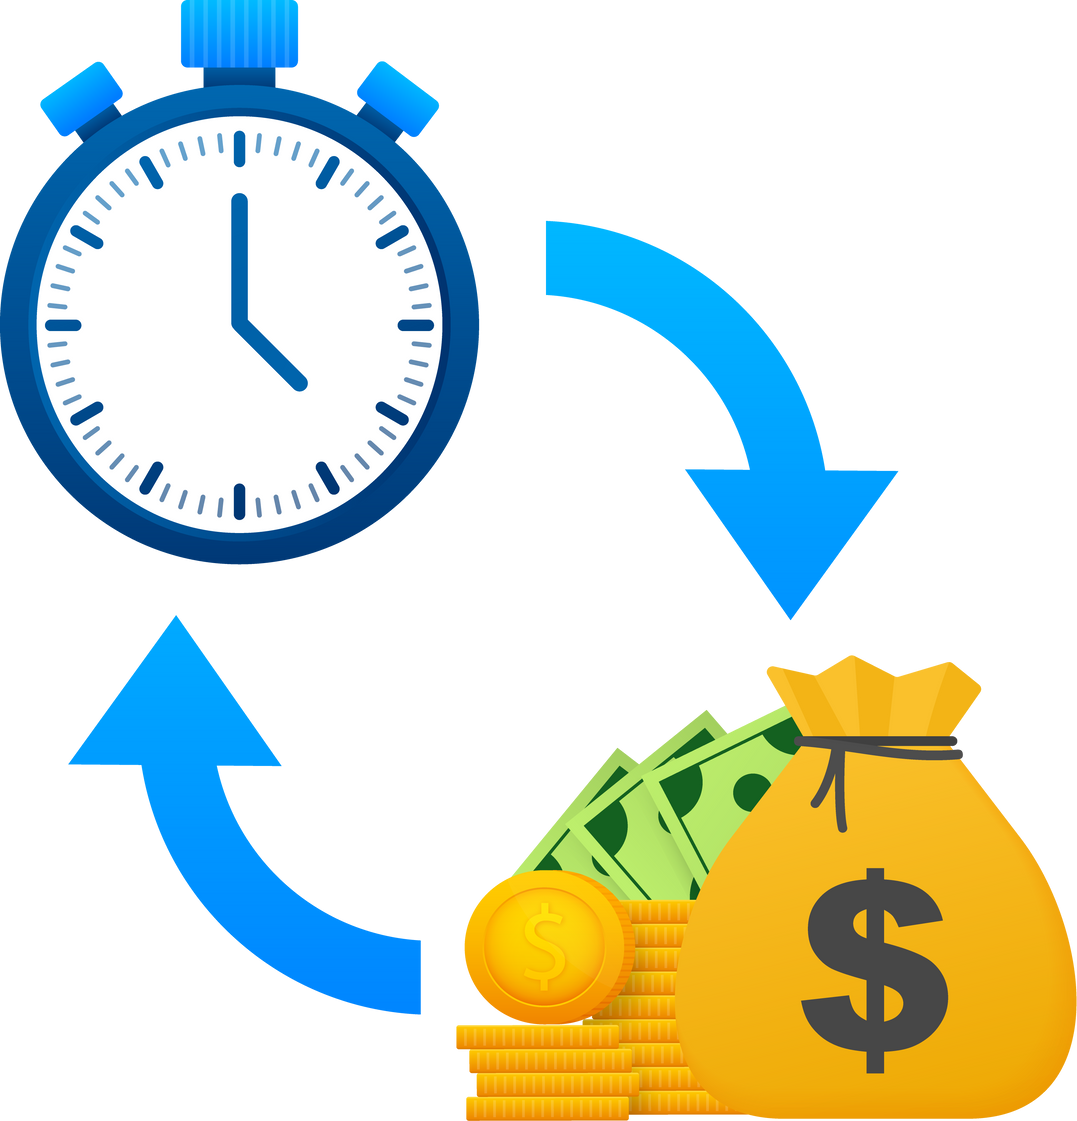 Time money saving. Financial investments. Time management, revenue increase.